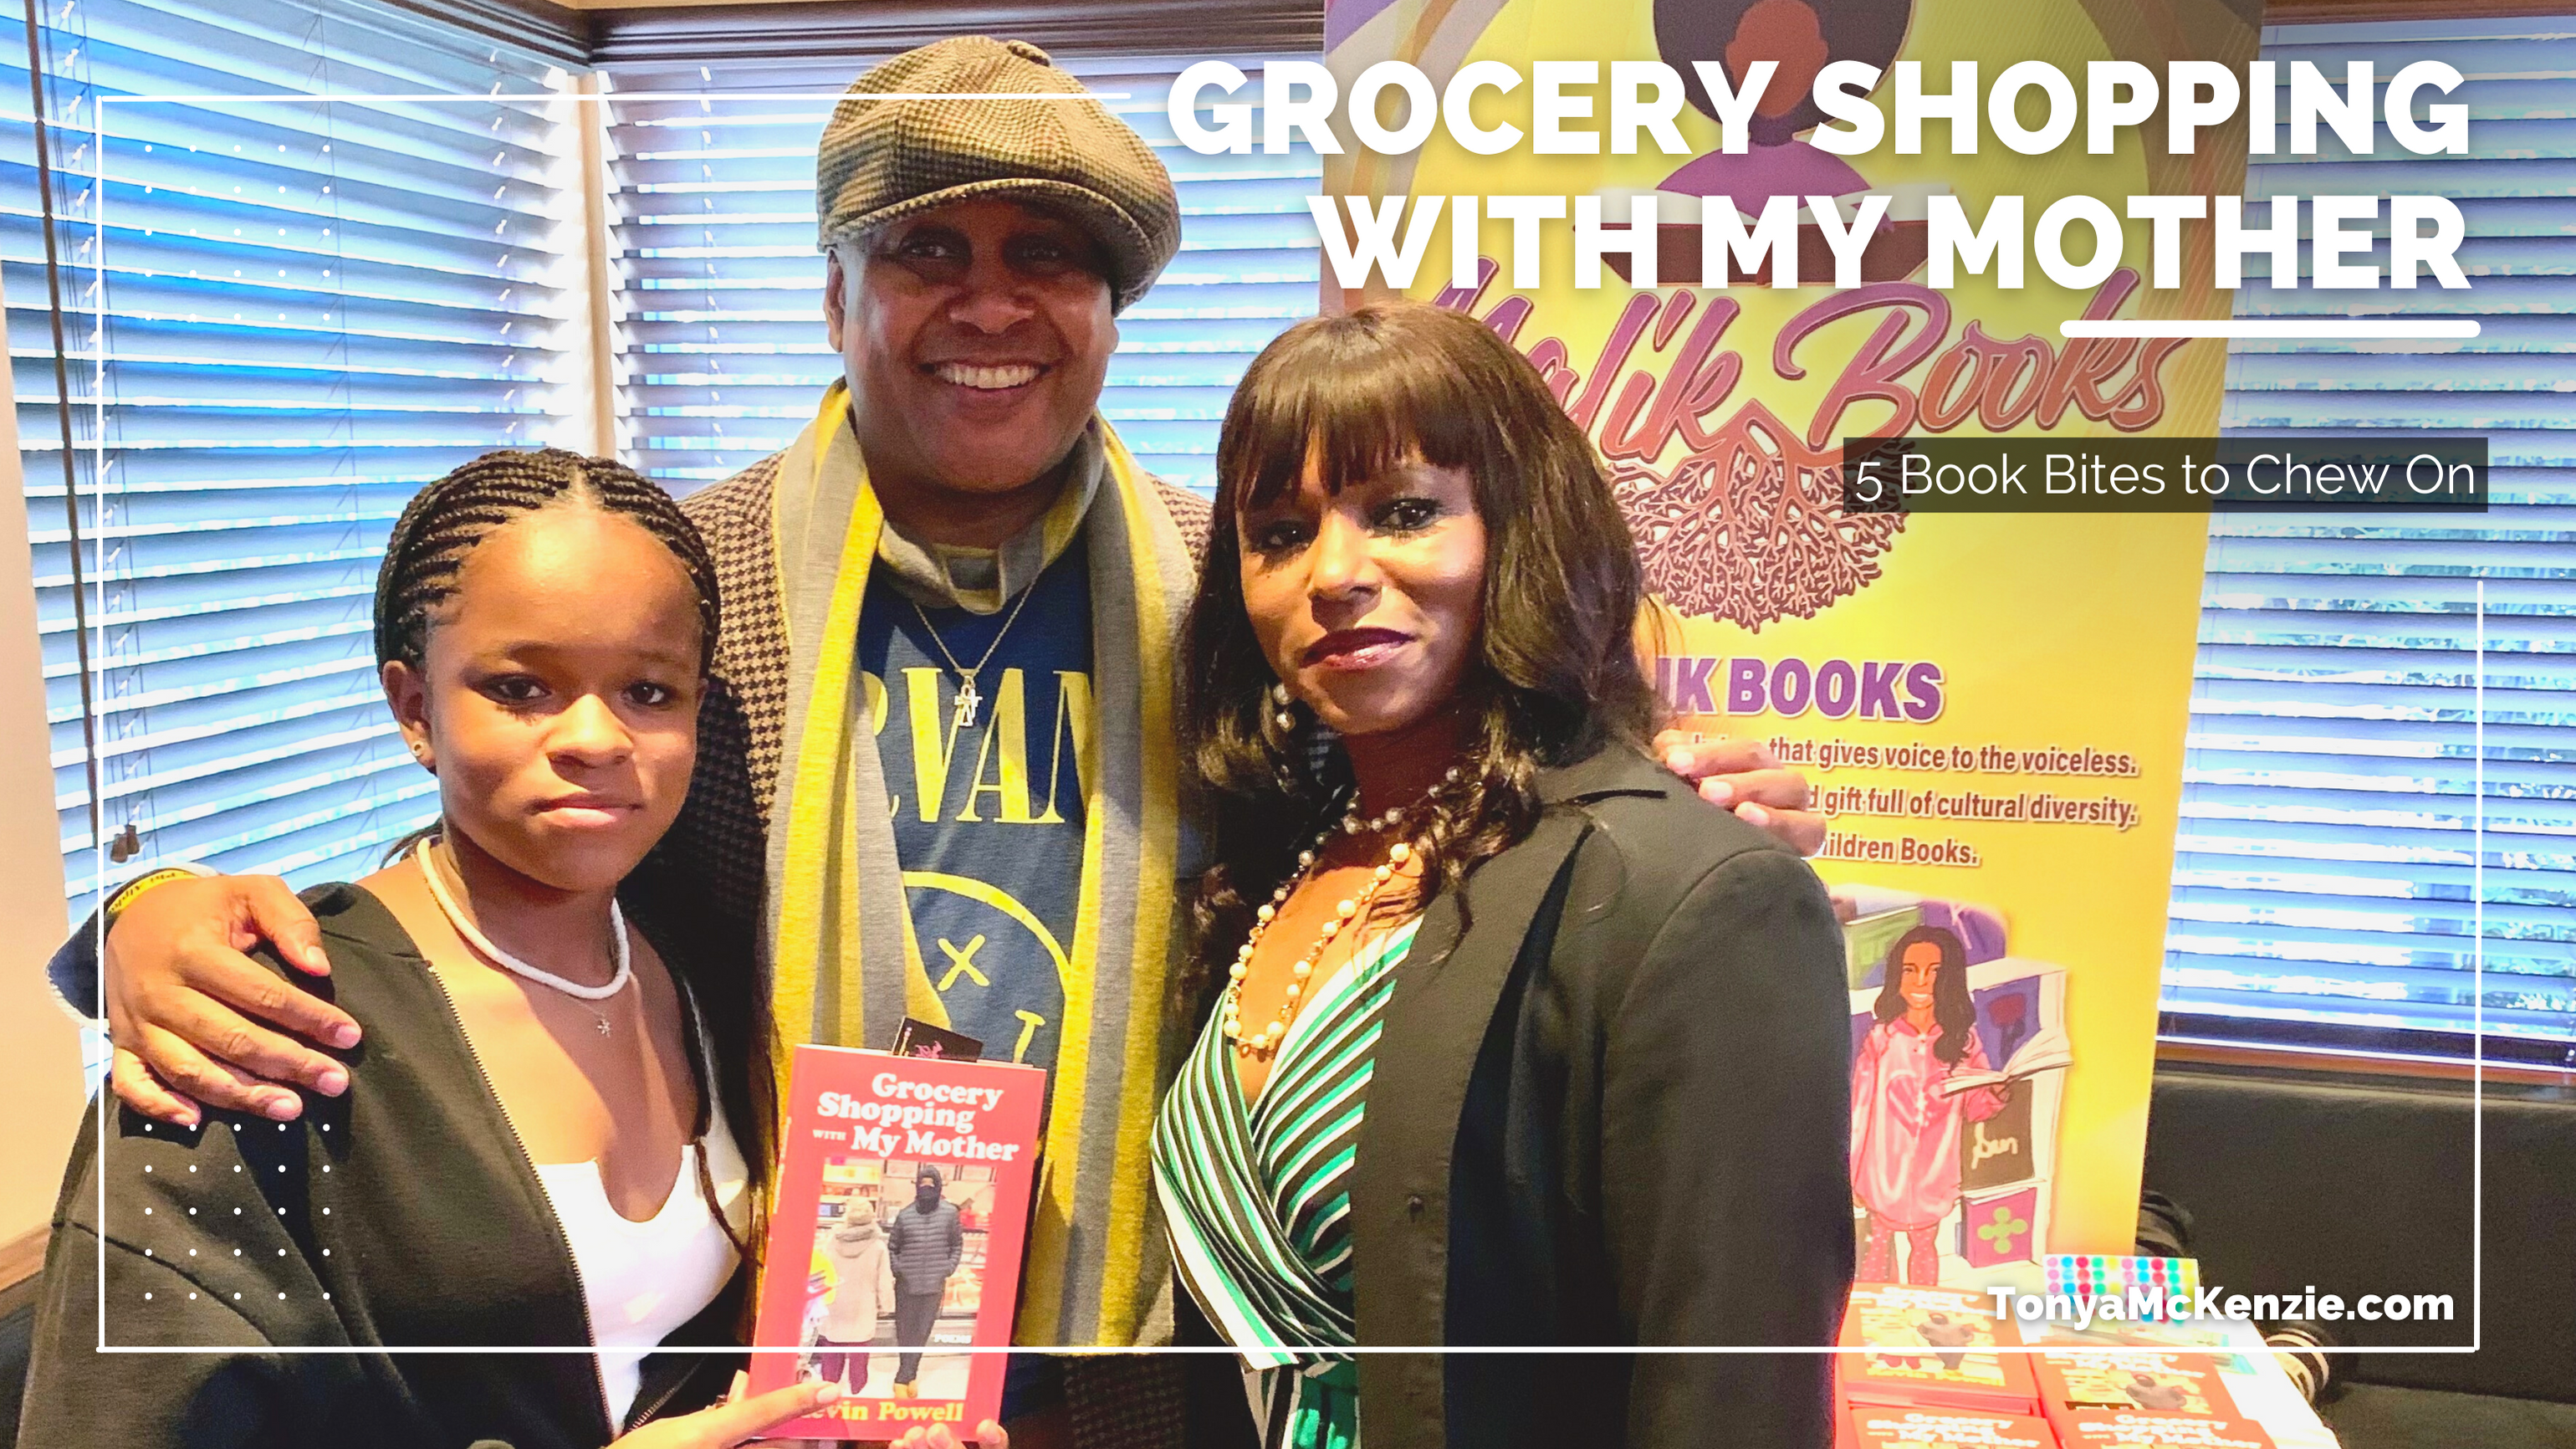 Kevin Powell Book Signing for Grocery Shopping with My Mother